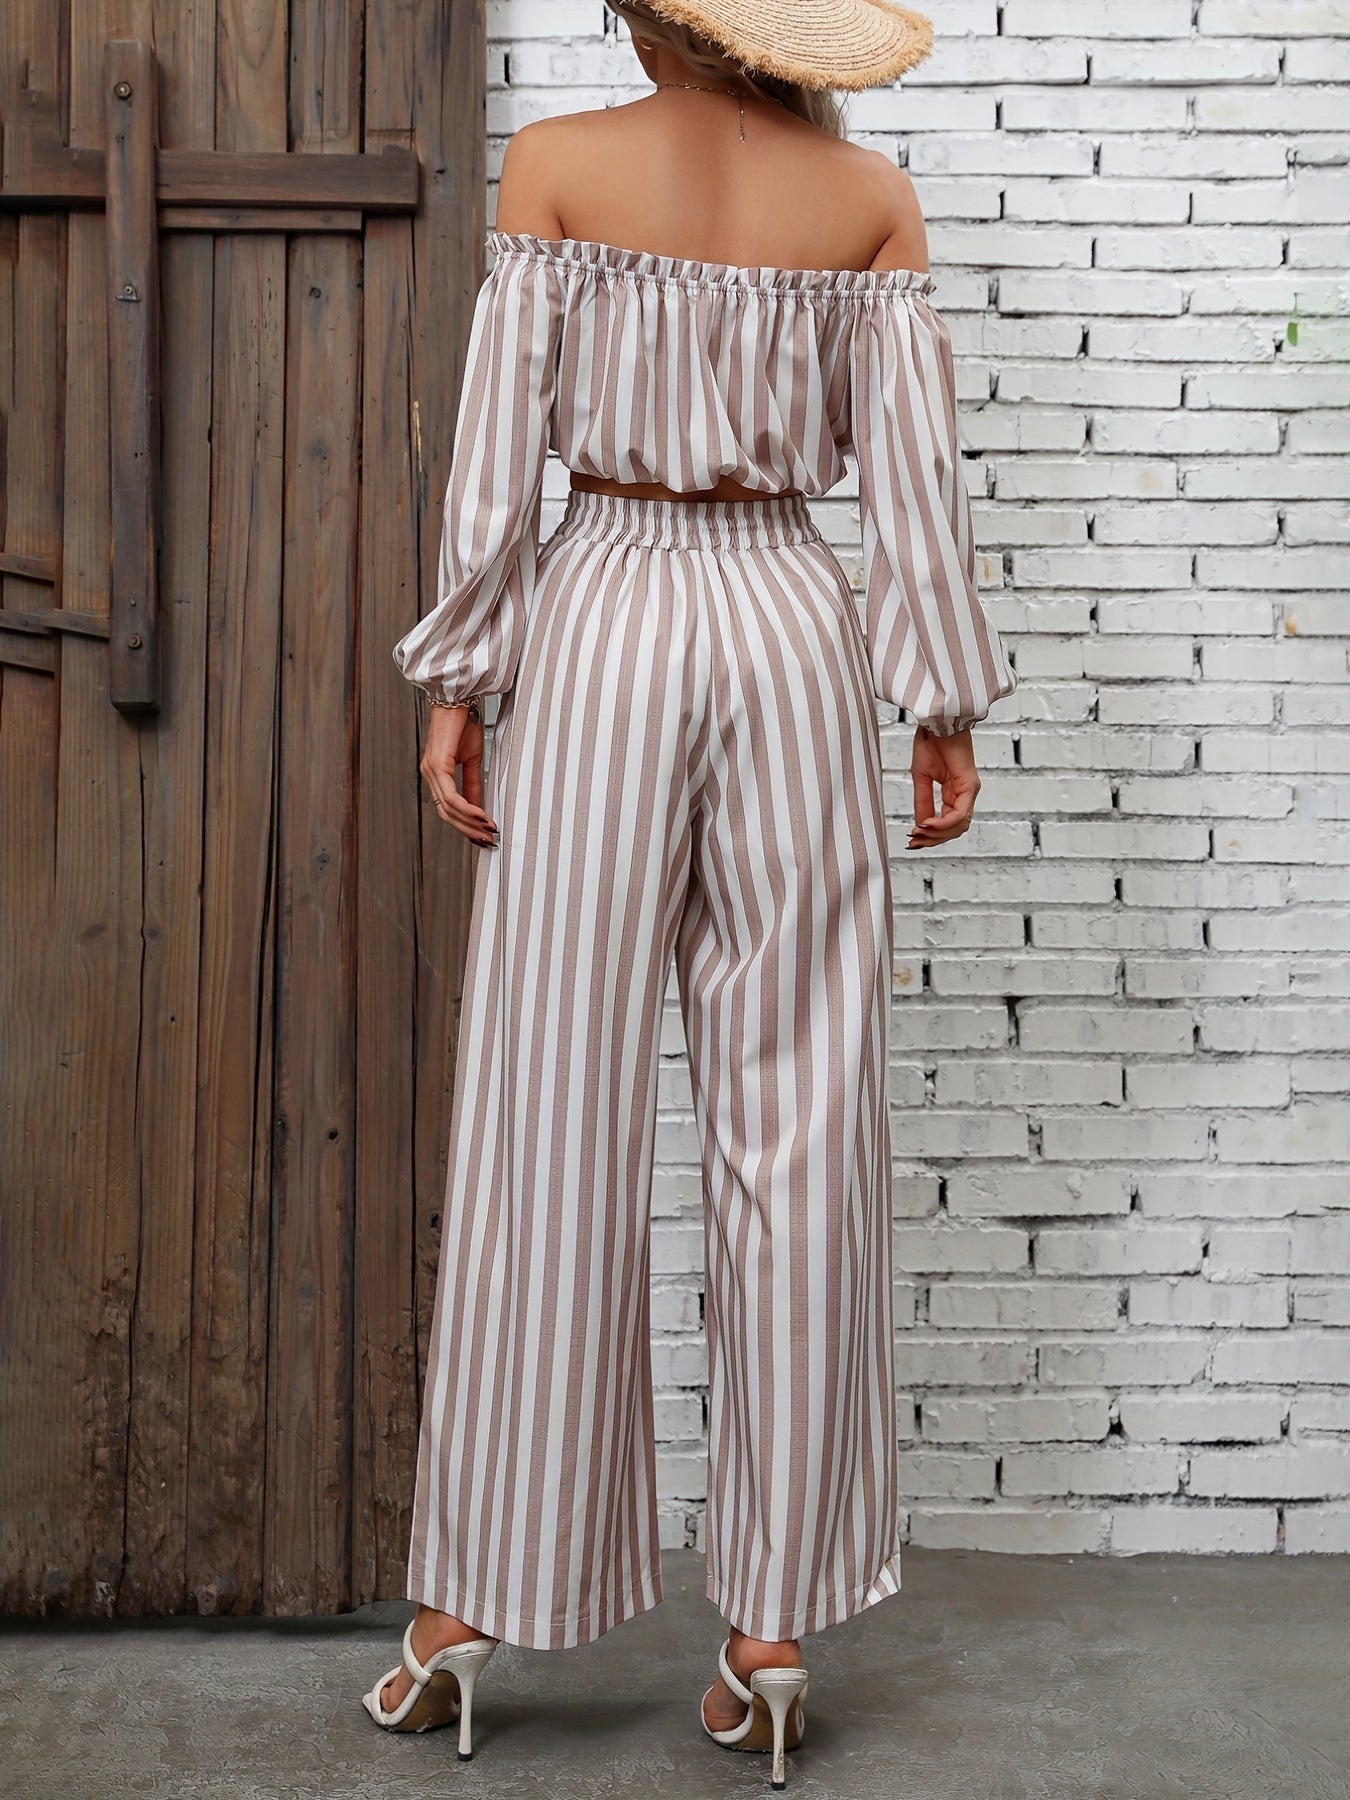 Striped Print Casual Two-piece Set, Off Shoulder Long Sleeve Tops & Wide Leg Drawstring Pants Outfits, Women's Clothing